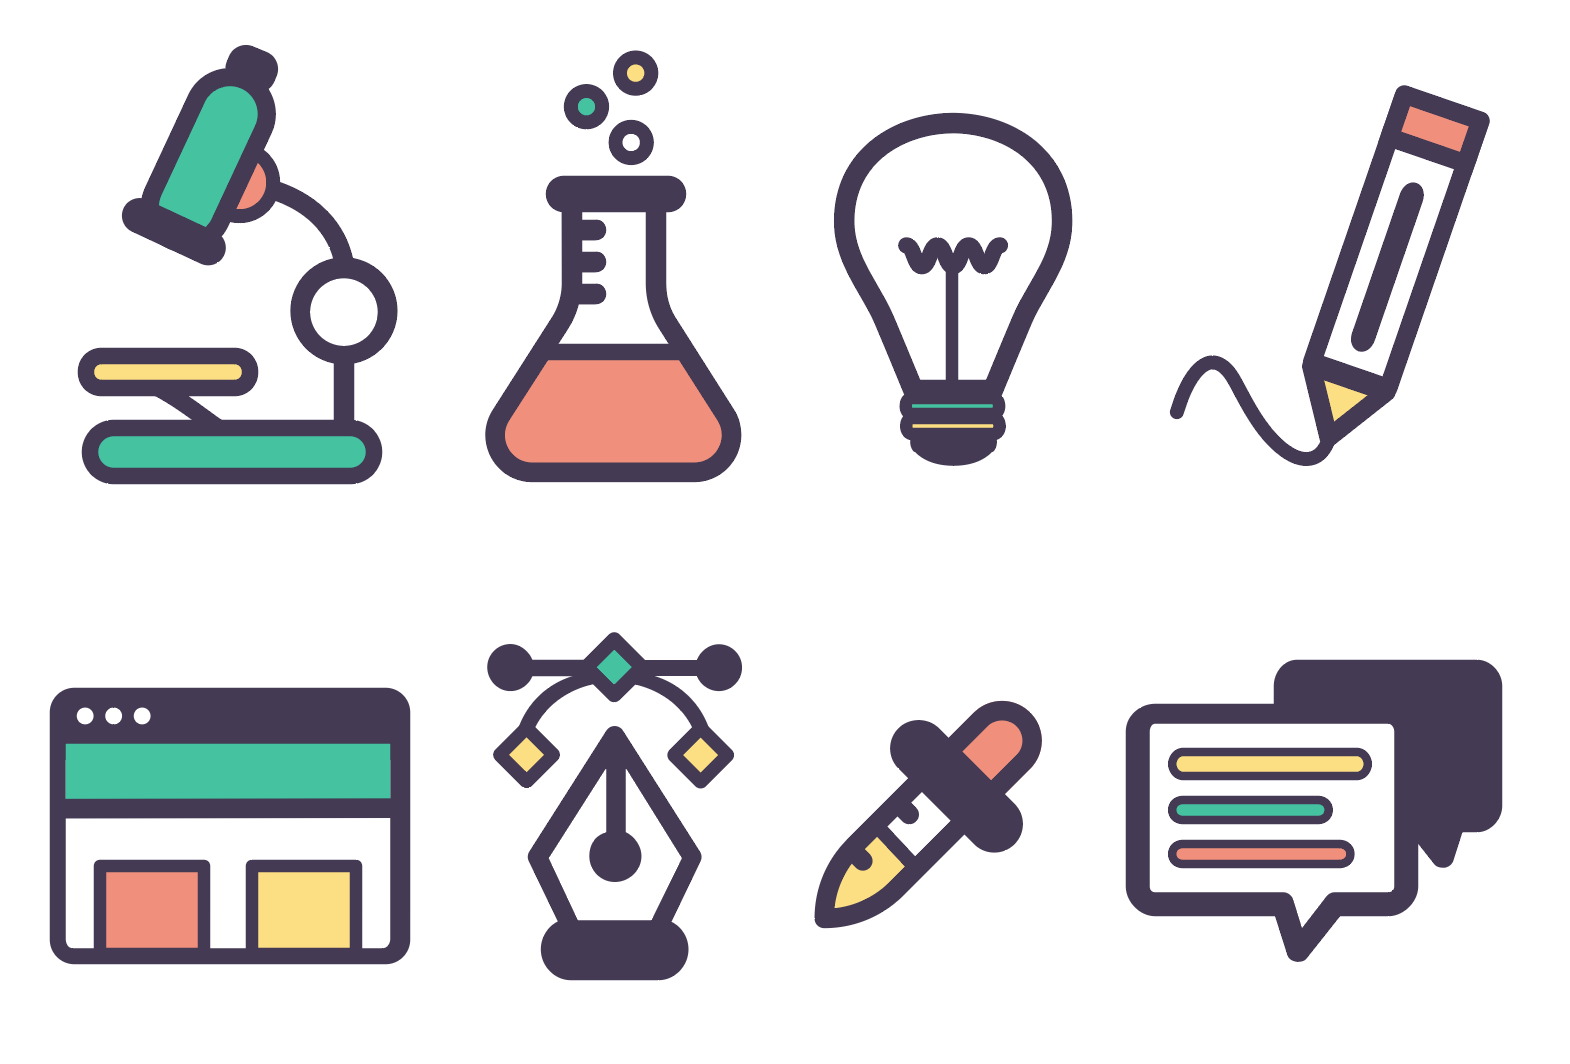 Illustrations of icons representing various design tasks